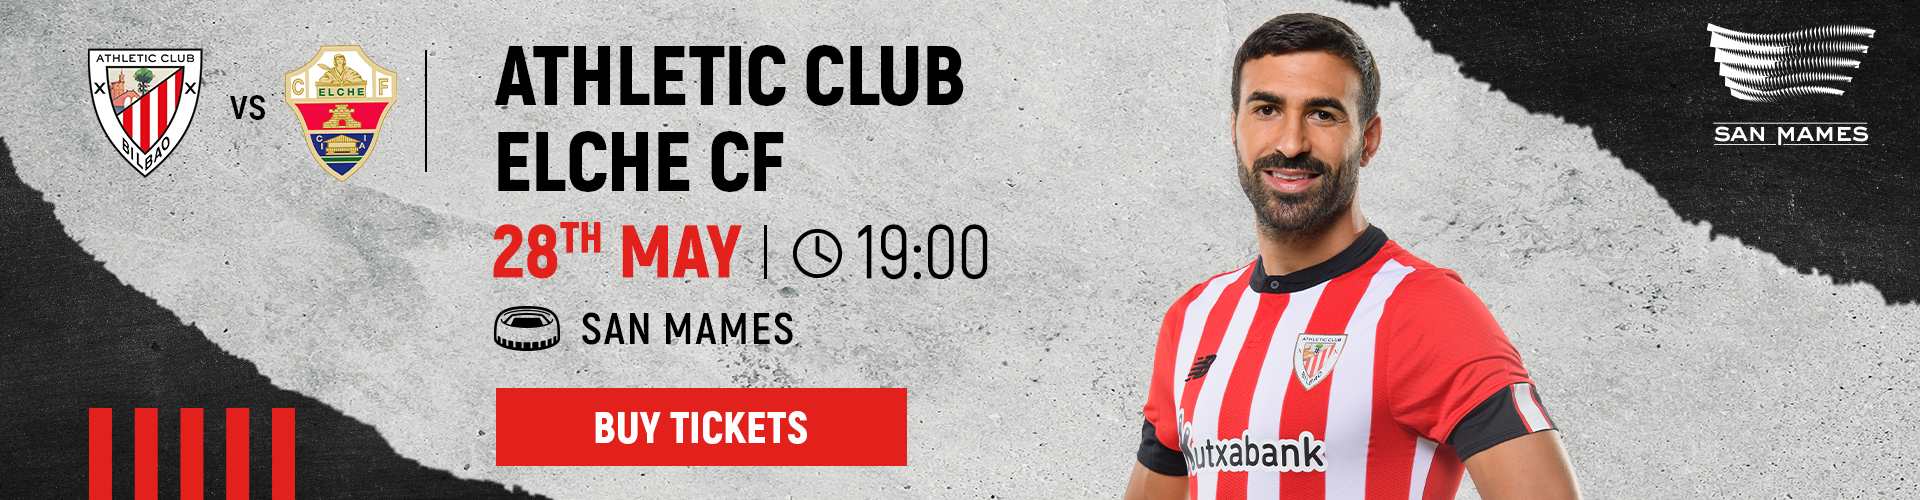 Tickets for Athletic Club vs Elche CF